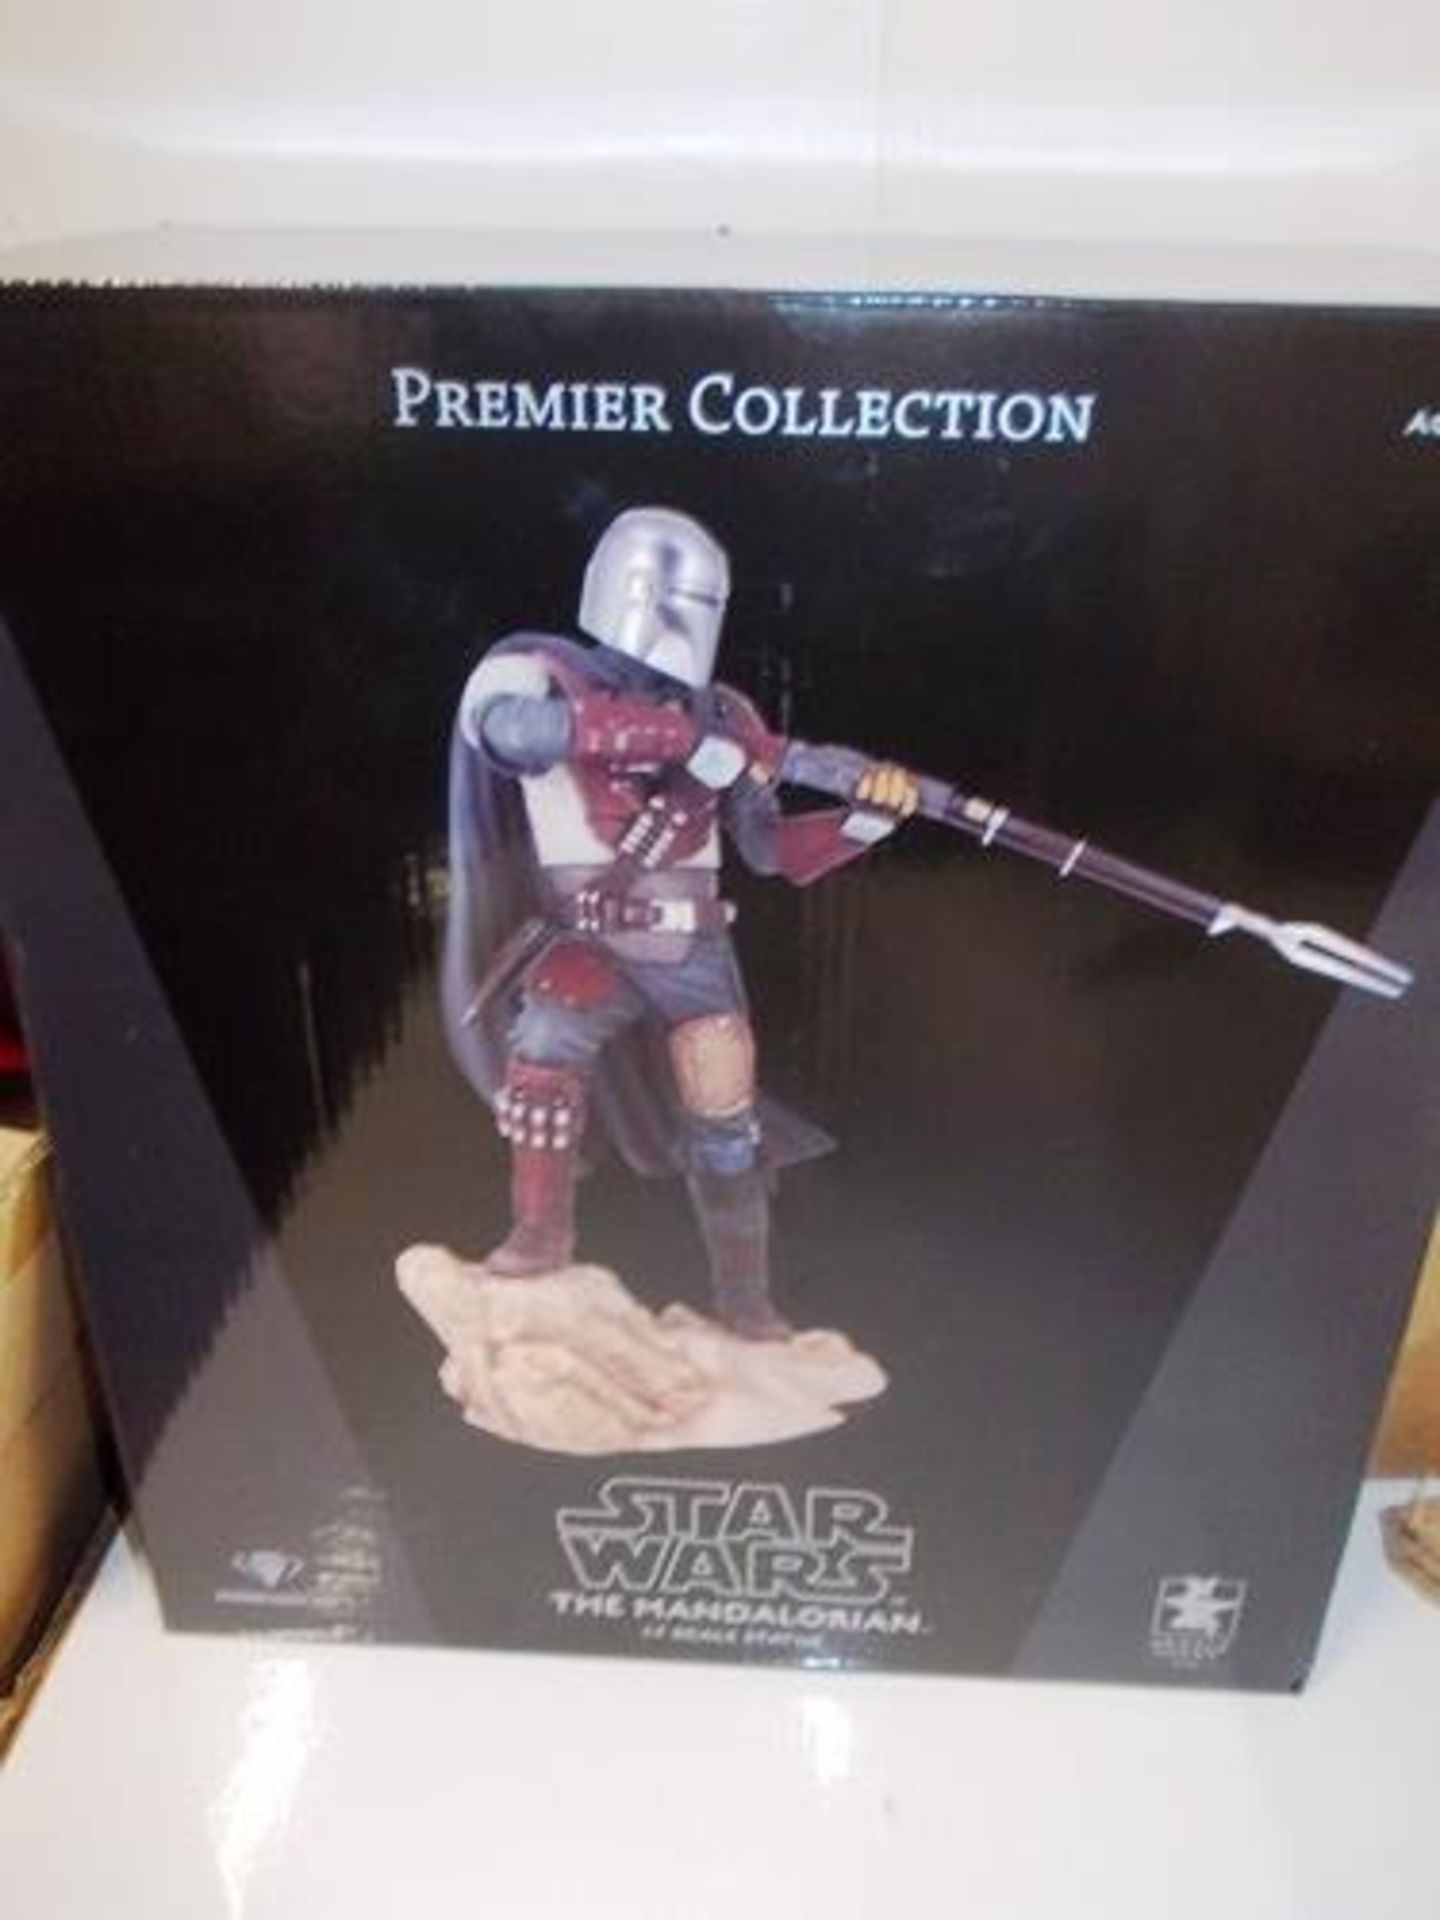 1 x Star Wars Premier Collection Mandalorian 1:7 scale figure by Gentle Giant - New in box (C8D)